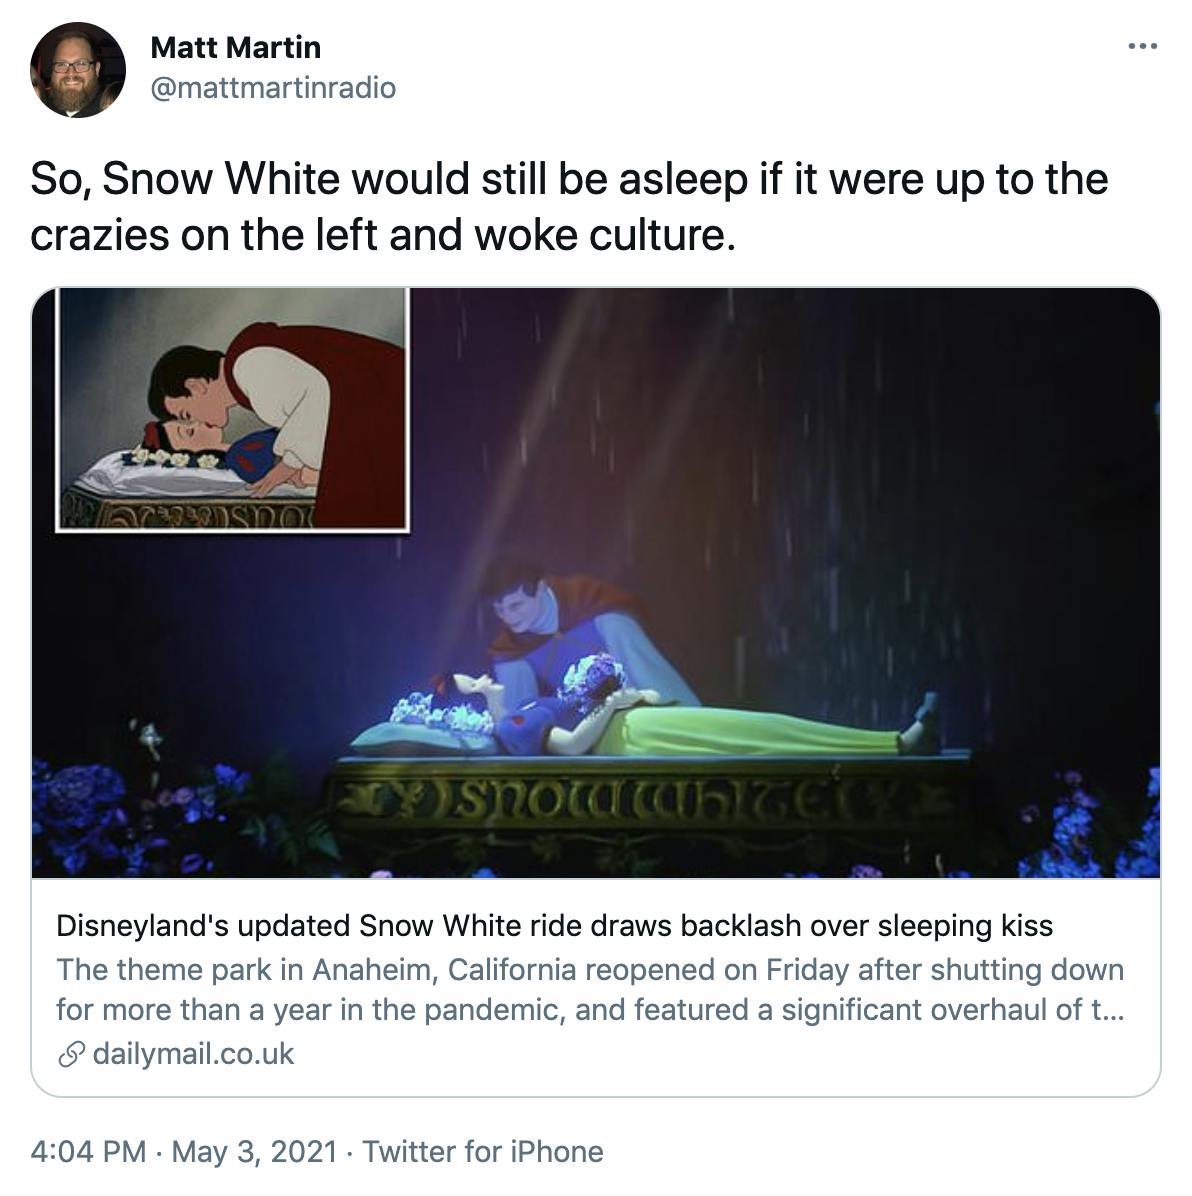 'So, Snow White would still be asleep if it were up to the crazies on the left and woke culture.' Link to the Daily Mail article about the faux outrage with the kiss scene as header image